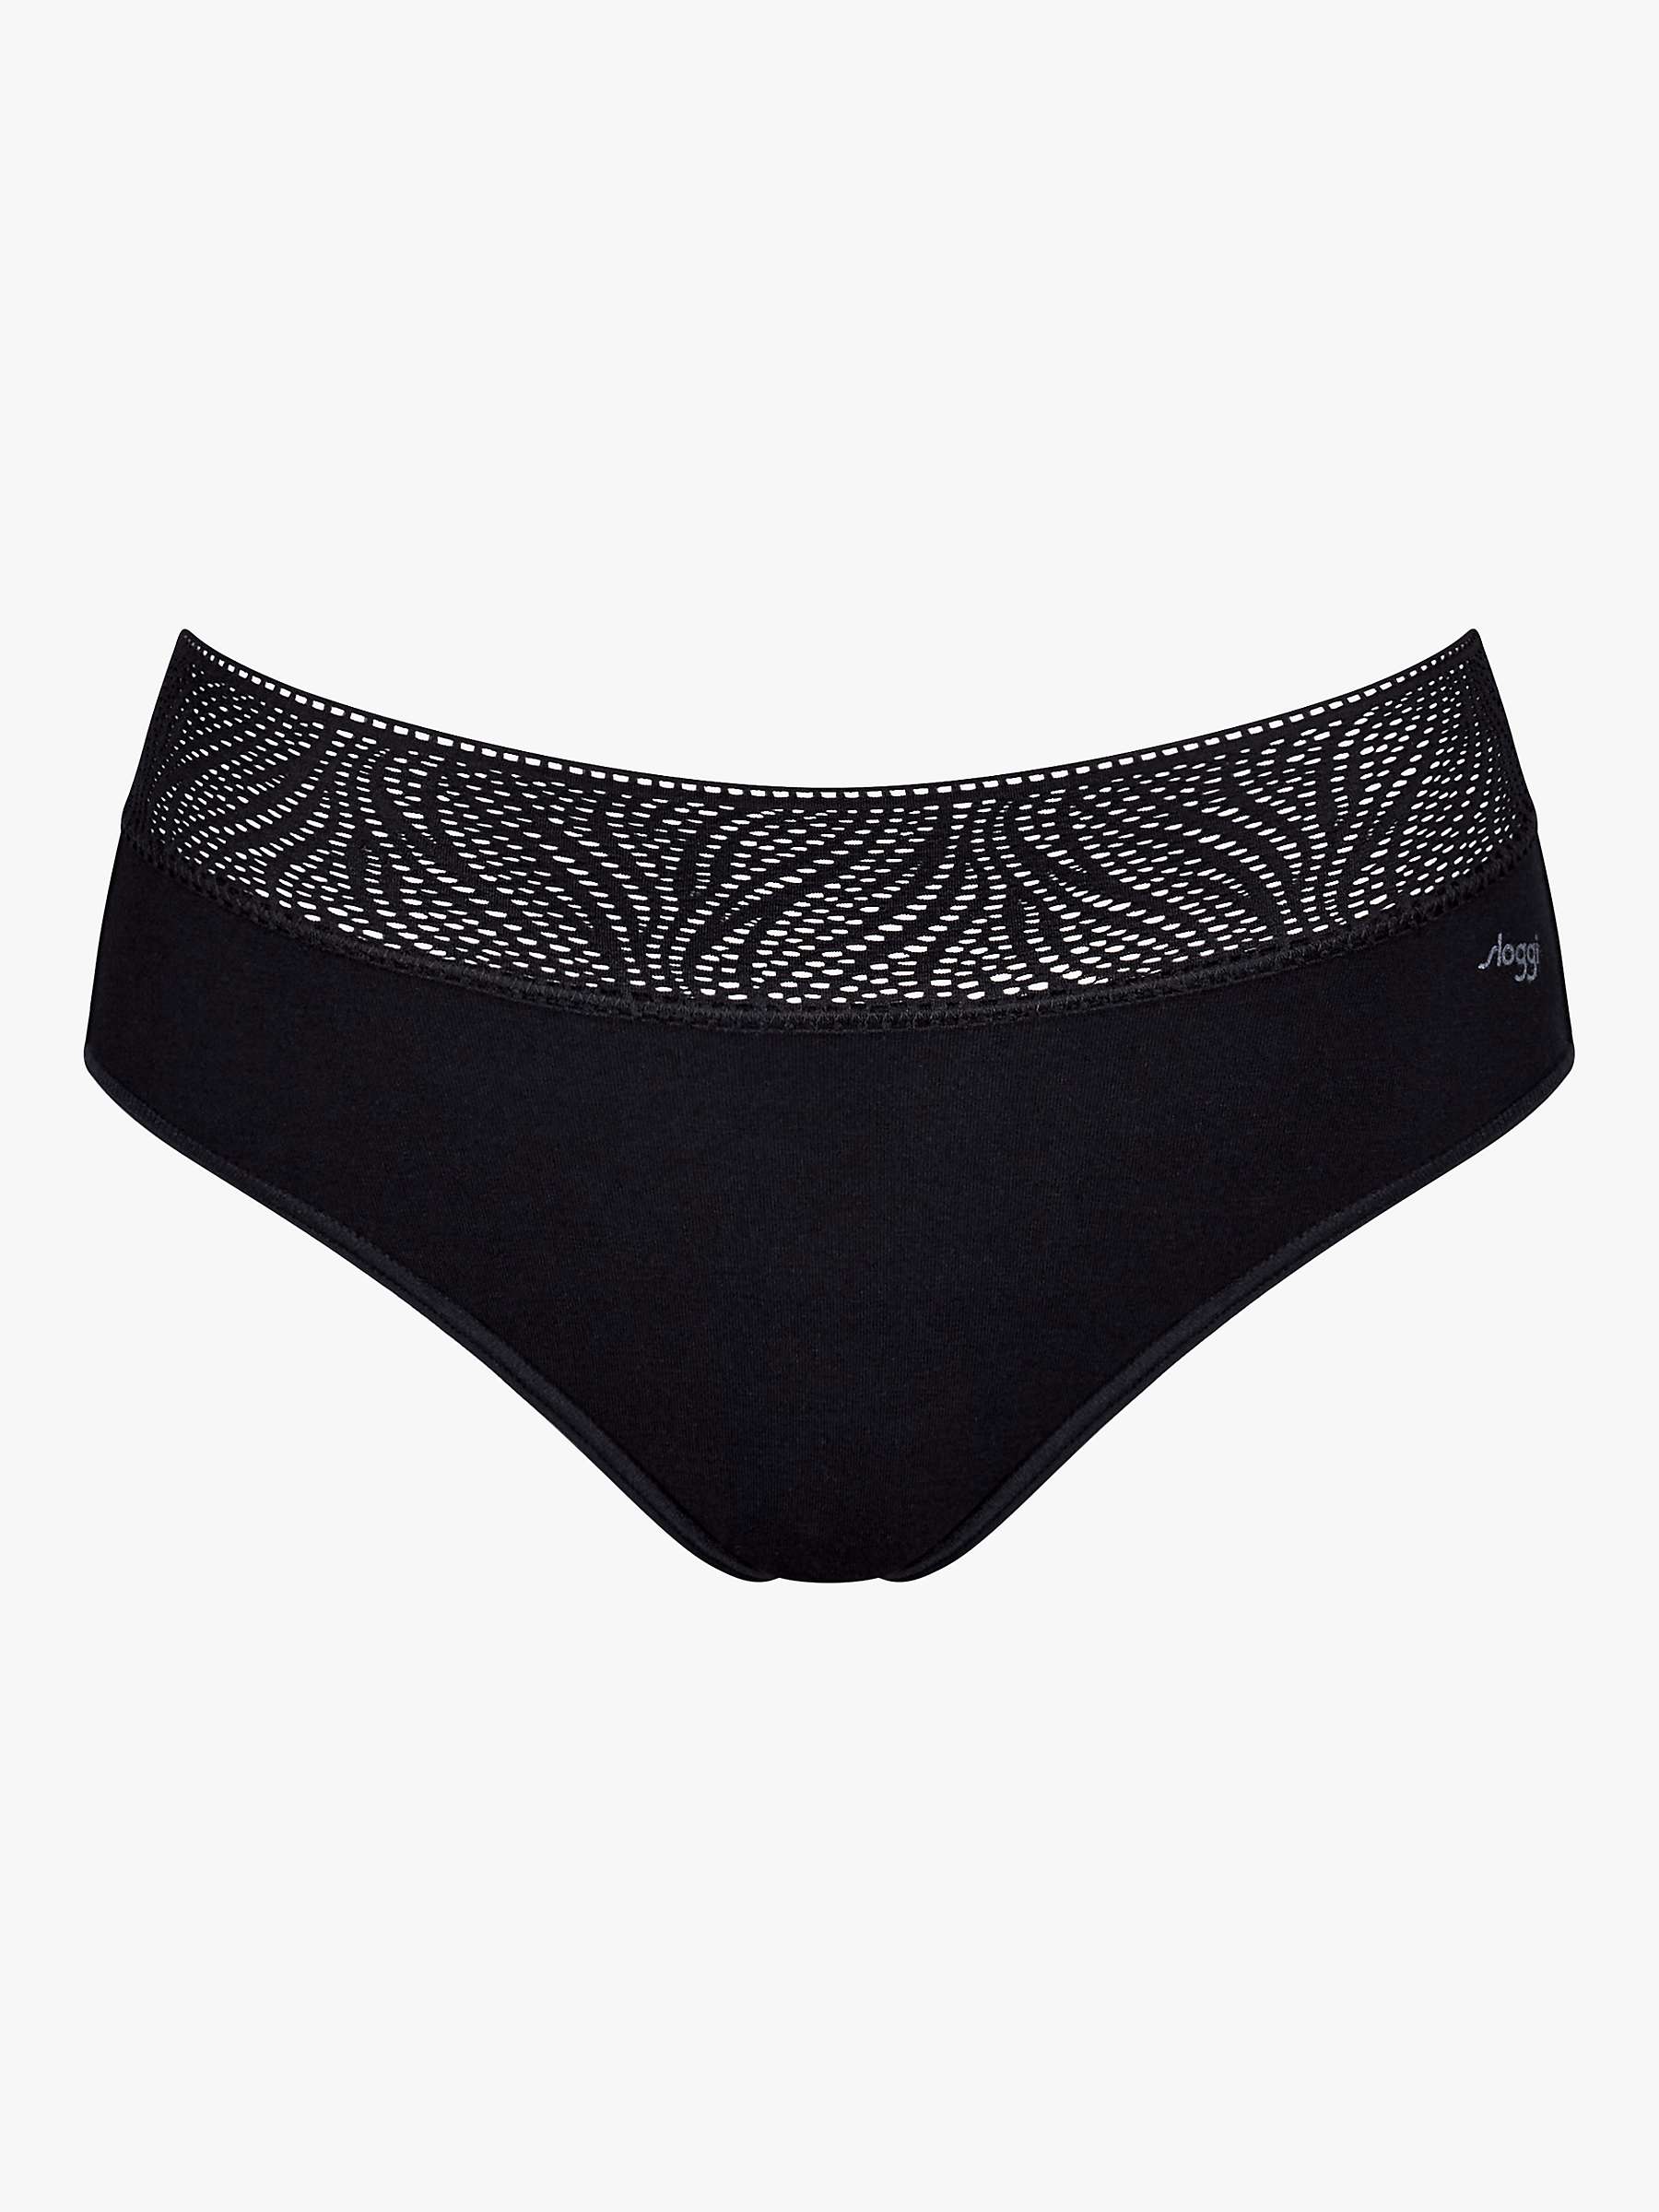 Buy sloggi High Absorbency Hipster Period Knickers, Pack of 2, Black Online at johnlewis.com